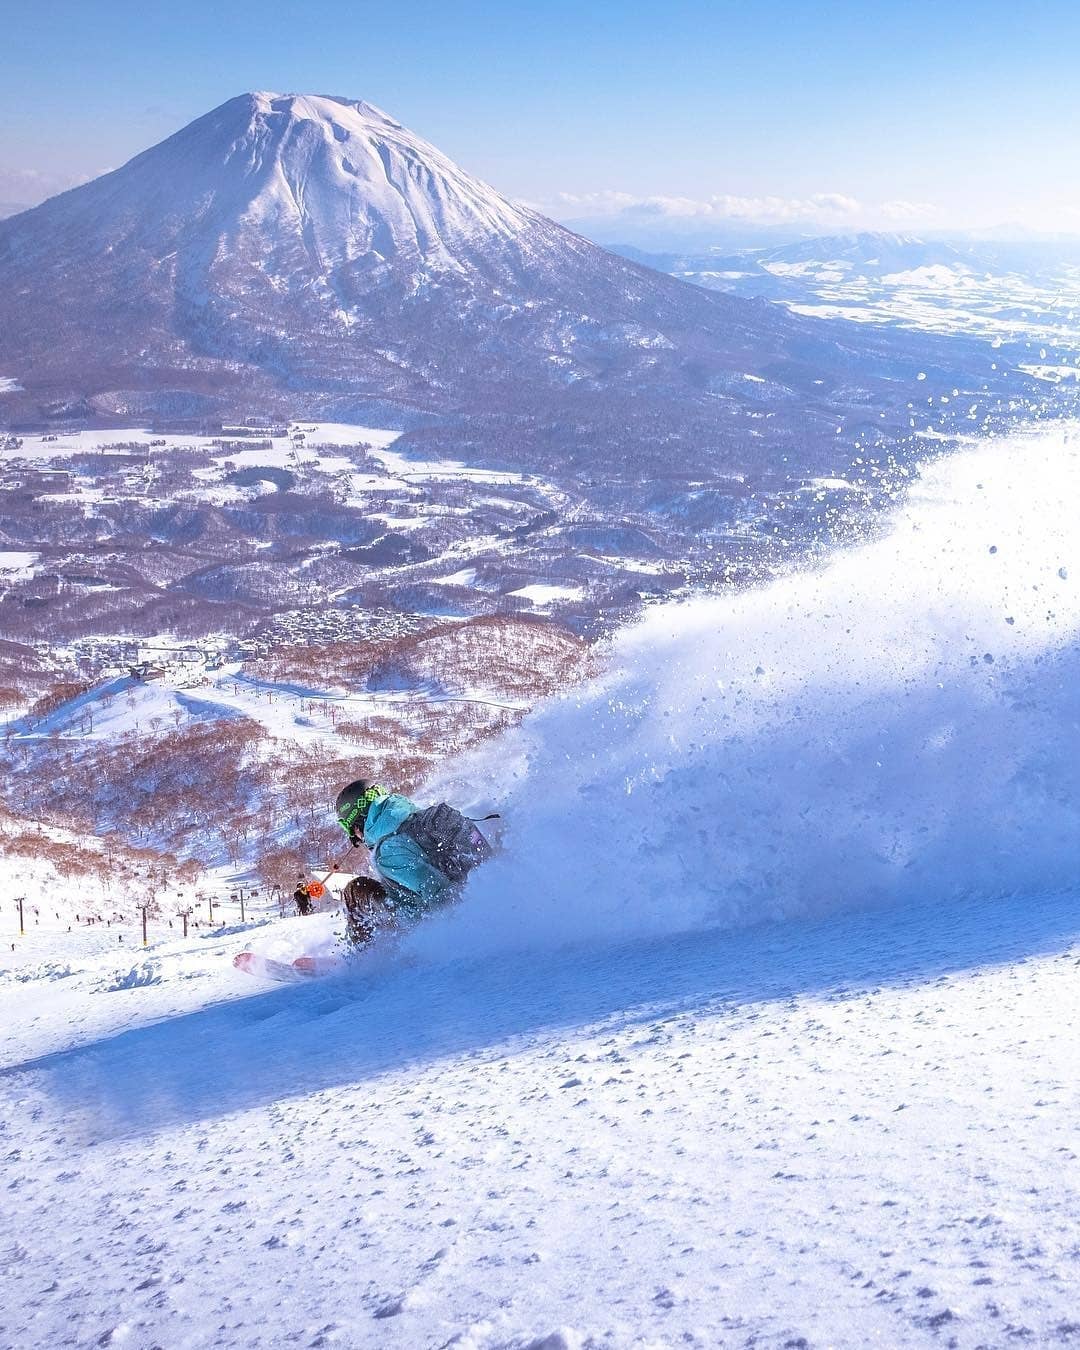 Cities in Japan to see snow - person skiing at Niseko